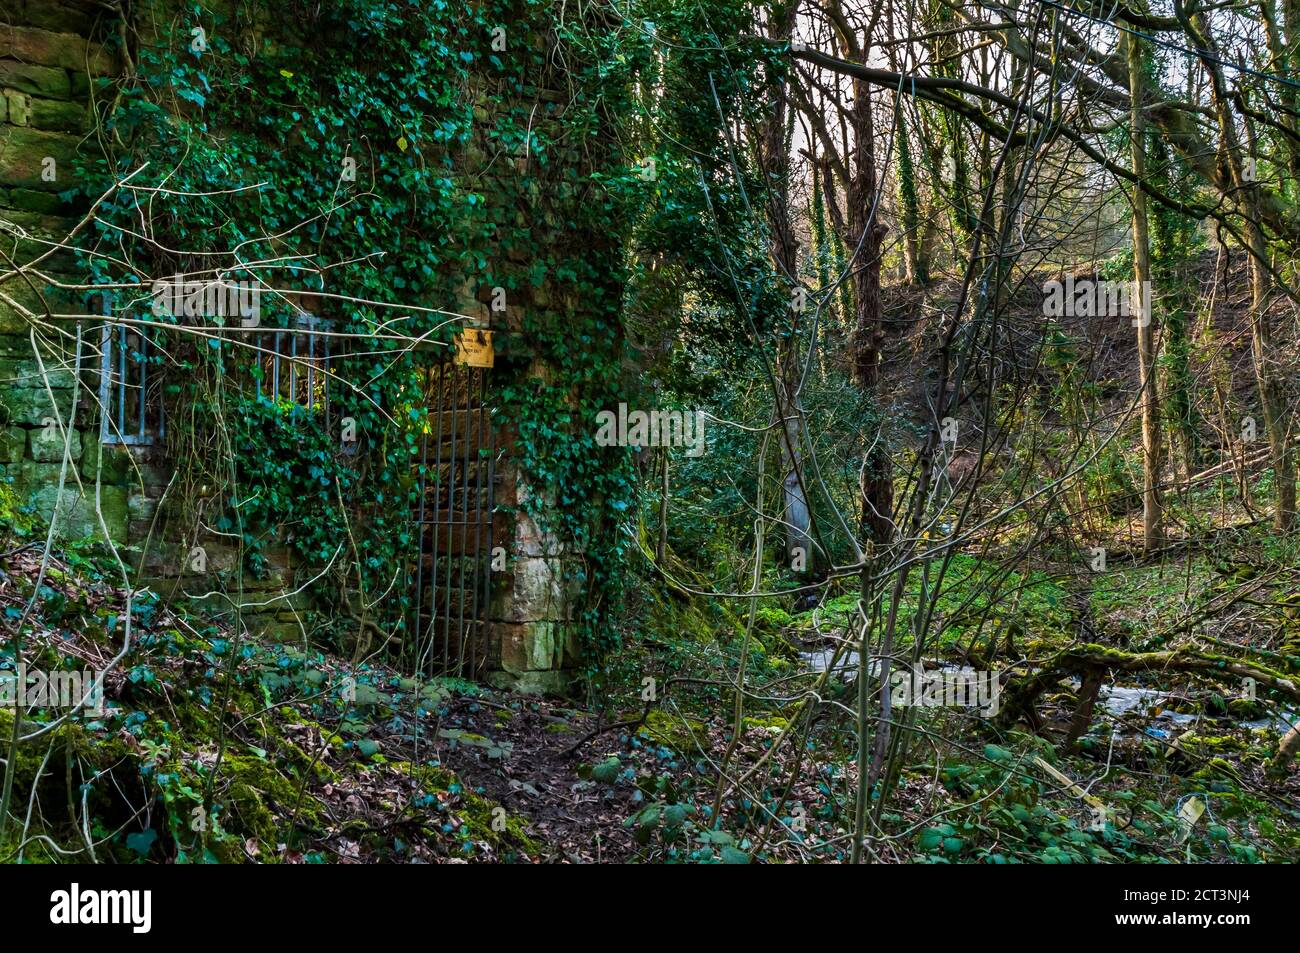 Abandoned old mill building at Ryecroft Glen in Ecclesall Woods, ancient woodland in Sheffield. Stock Photo